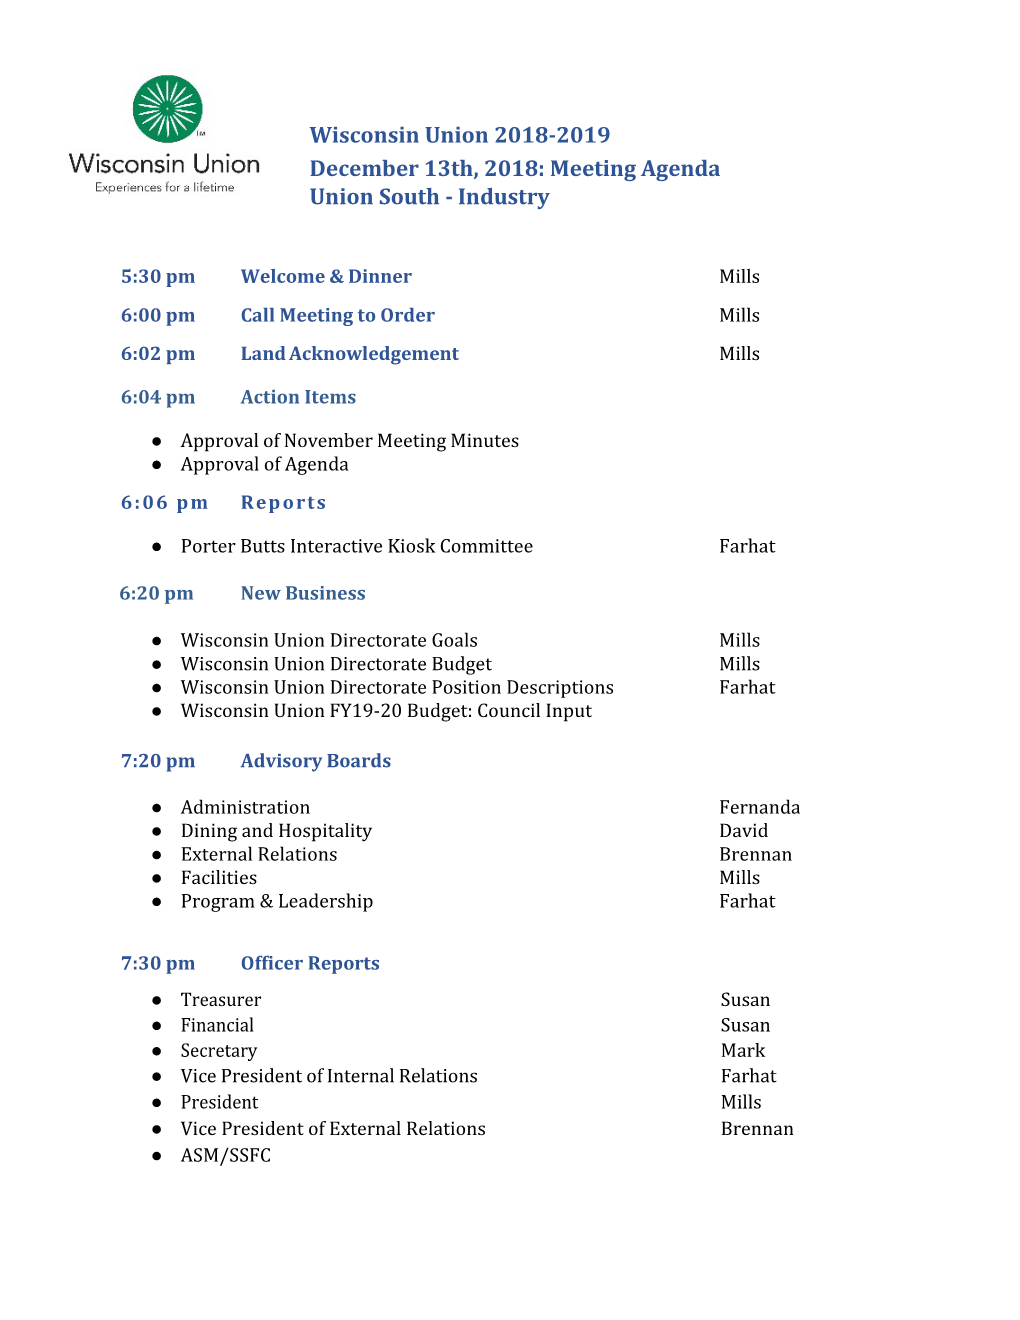 Wisconsin Union 2018-2019 December 13Th, 2018: Meeting Agenda Union South - Industry